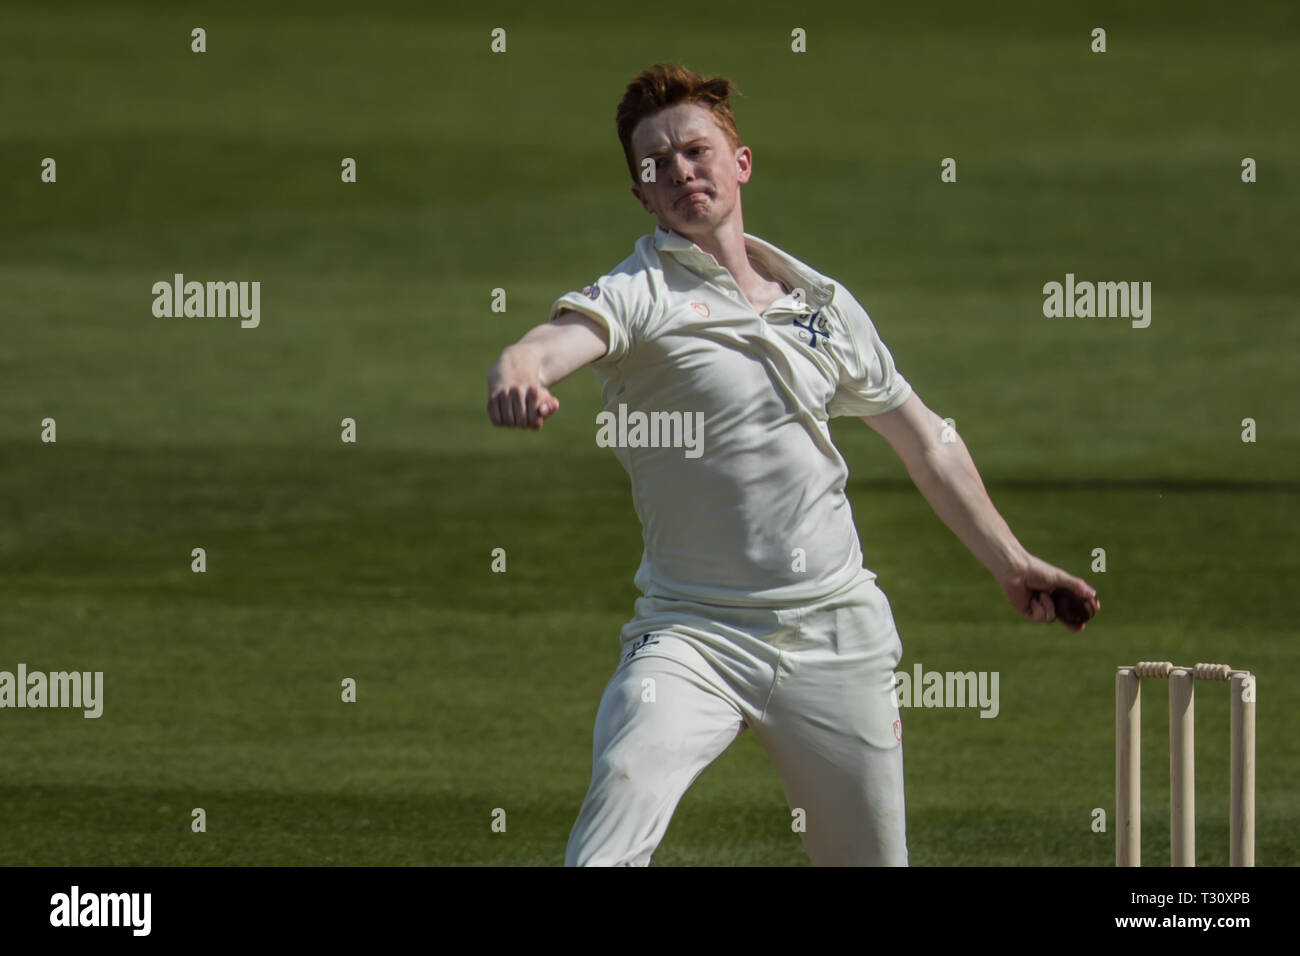 London, UK. 5th Apr, 2019. Joe Emanuel bowling as Surrey take on Durham MCCU at the Kia Oval on day two of the 3 day match. Credit: David Rowe/Alamy Live News Stock Photo